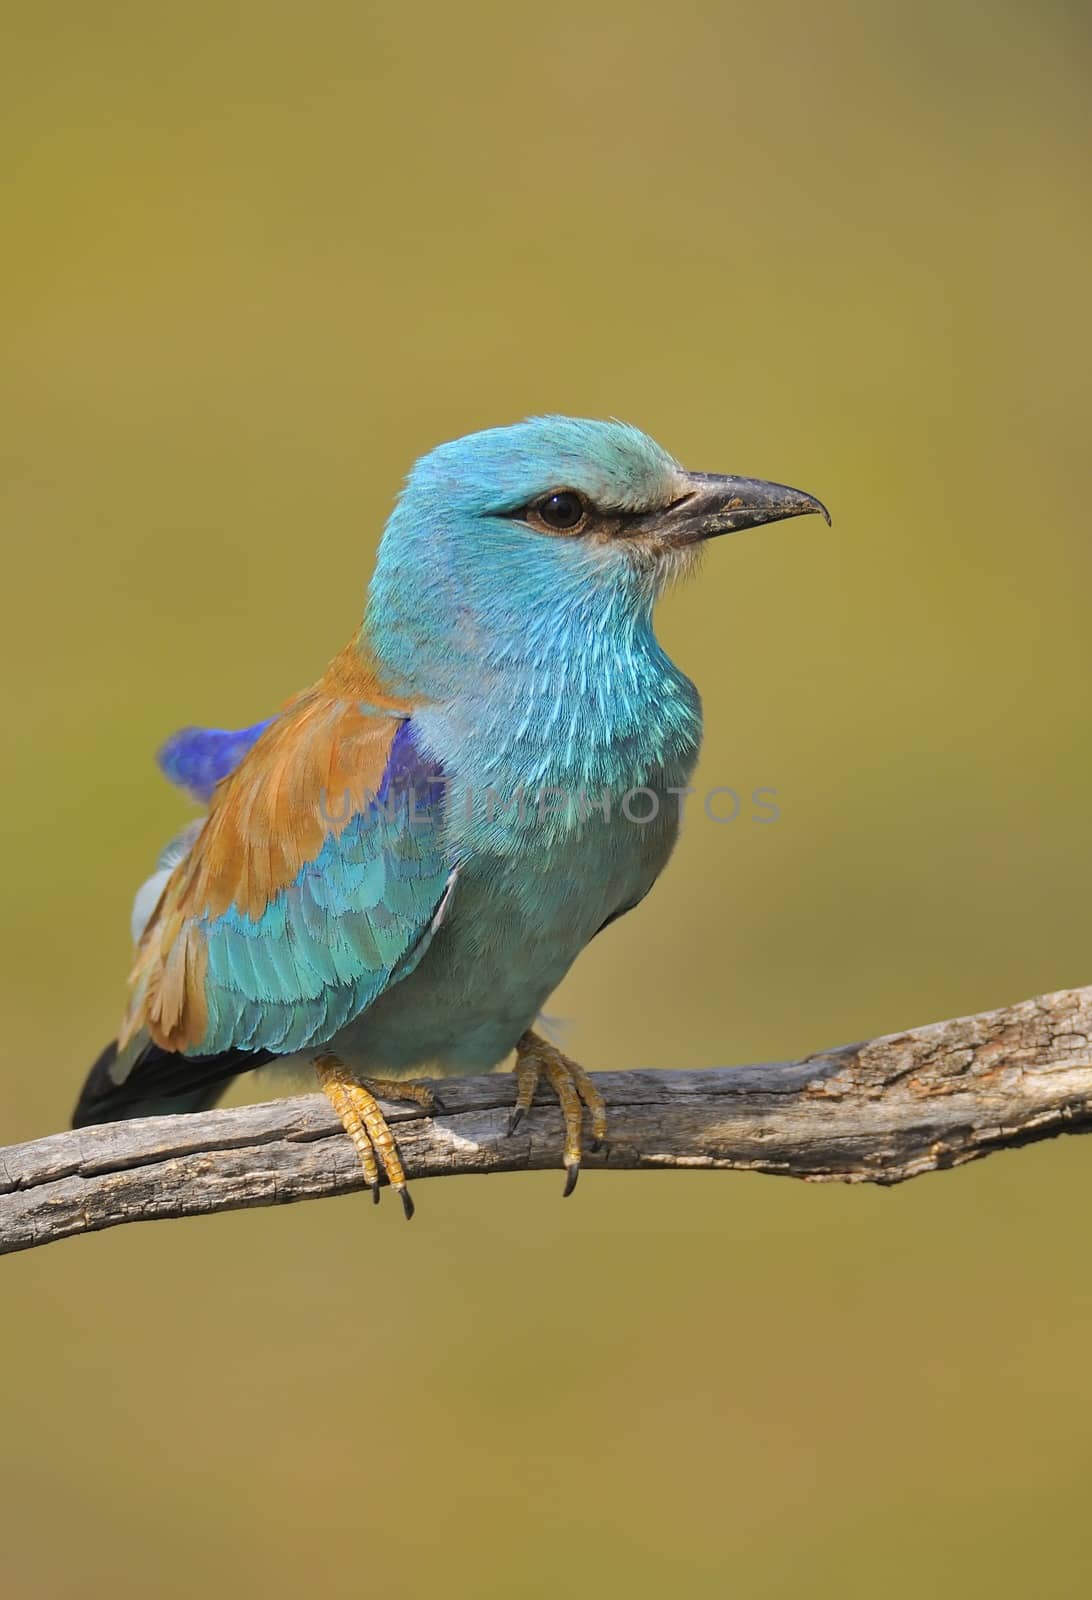 European roller perched on a branch with unfocused background.